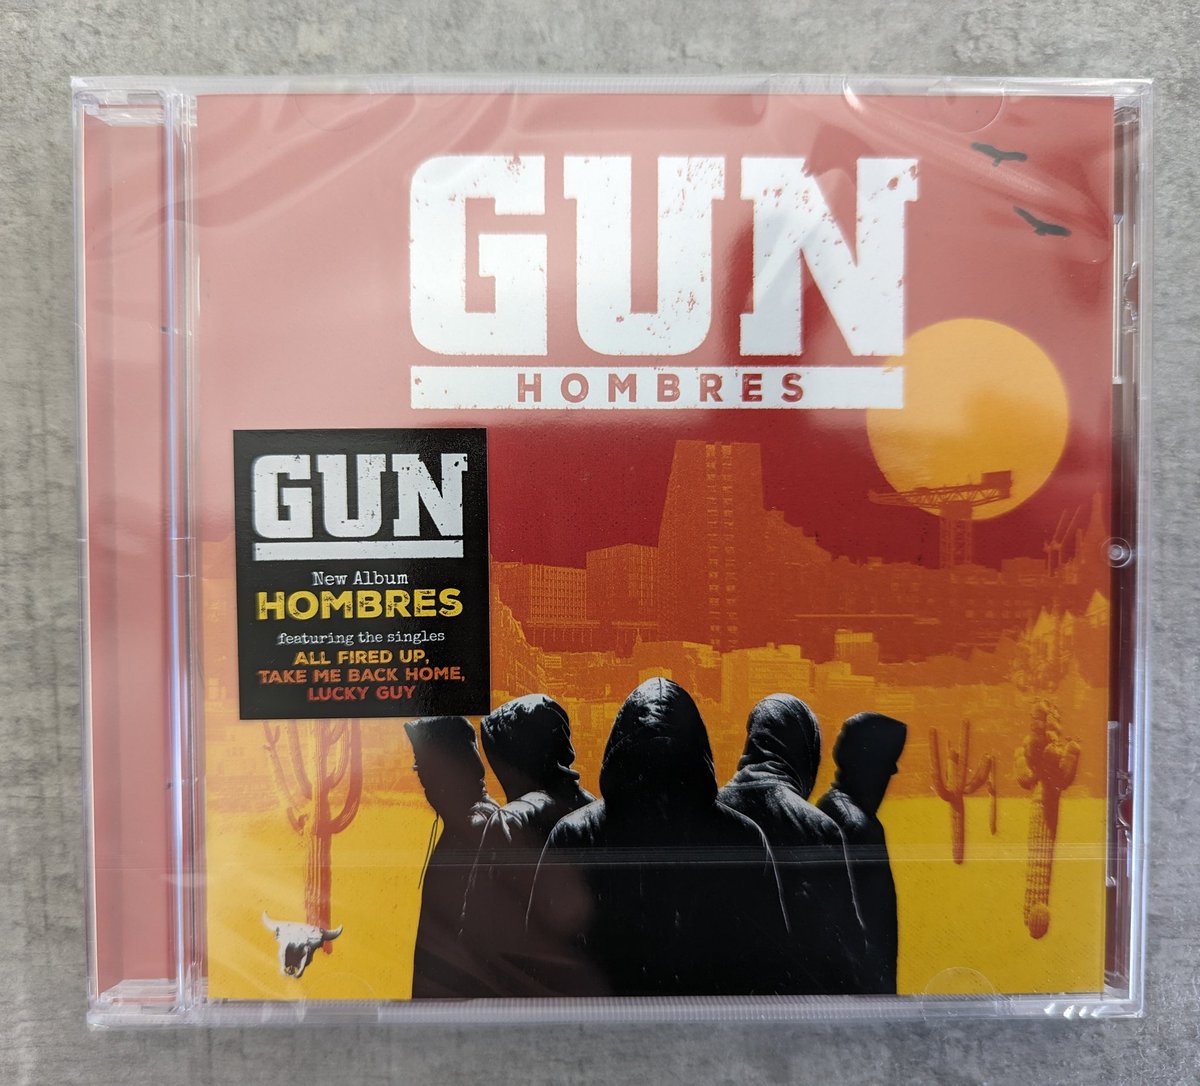 #Competition! @gunofficialuk have released their wholly outstanding new album #Hombres. For a chance to win this sealed CD, follow @rocktoday1 & Repost this msg! Check out our interview with the band at rocktoday.co.uk #win Will post worldwide.